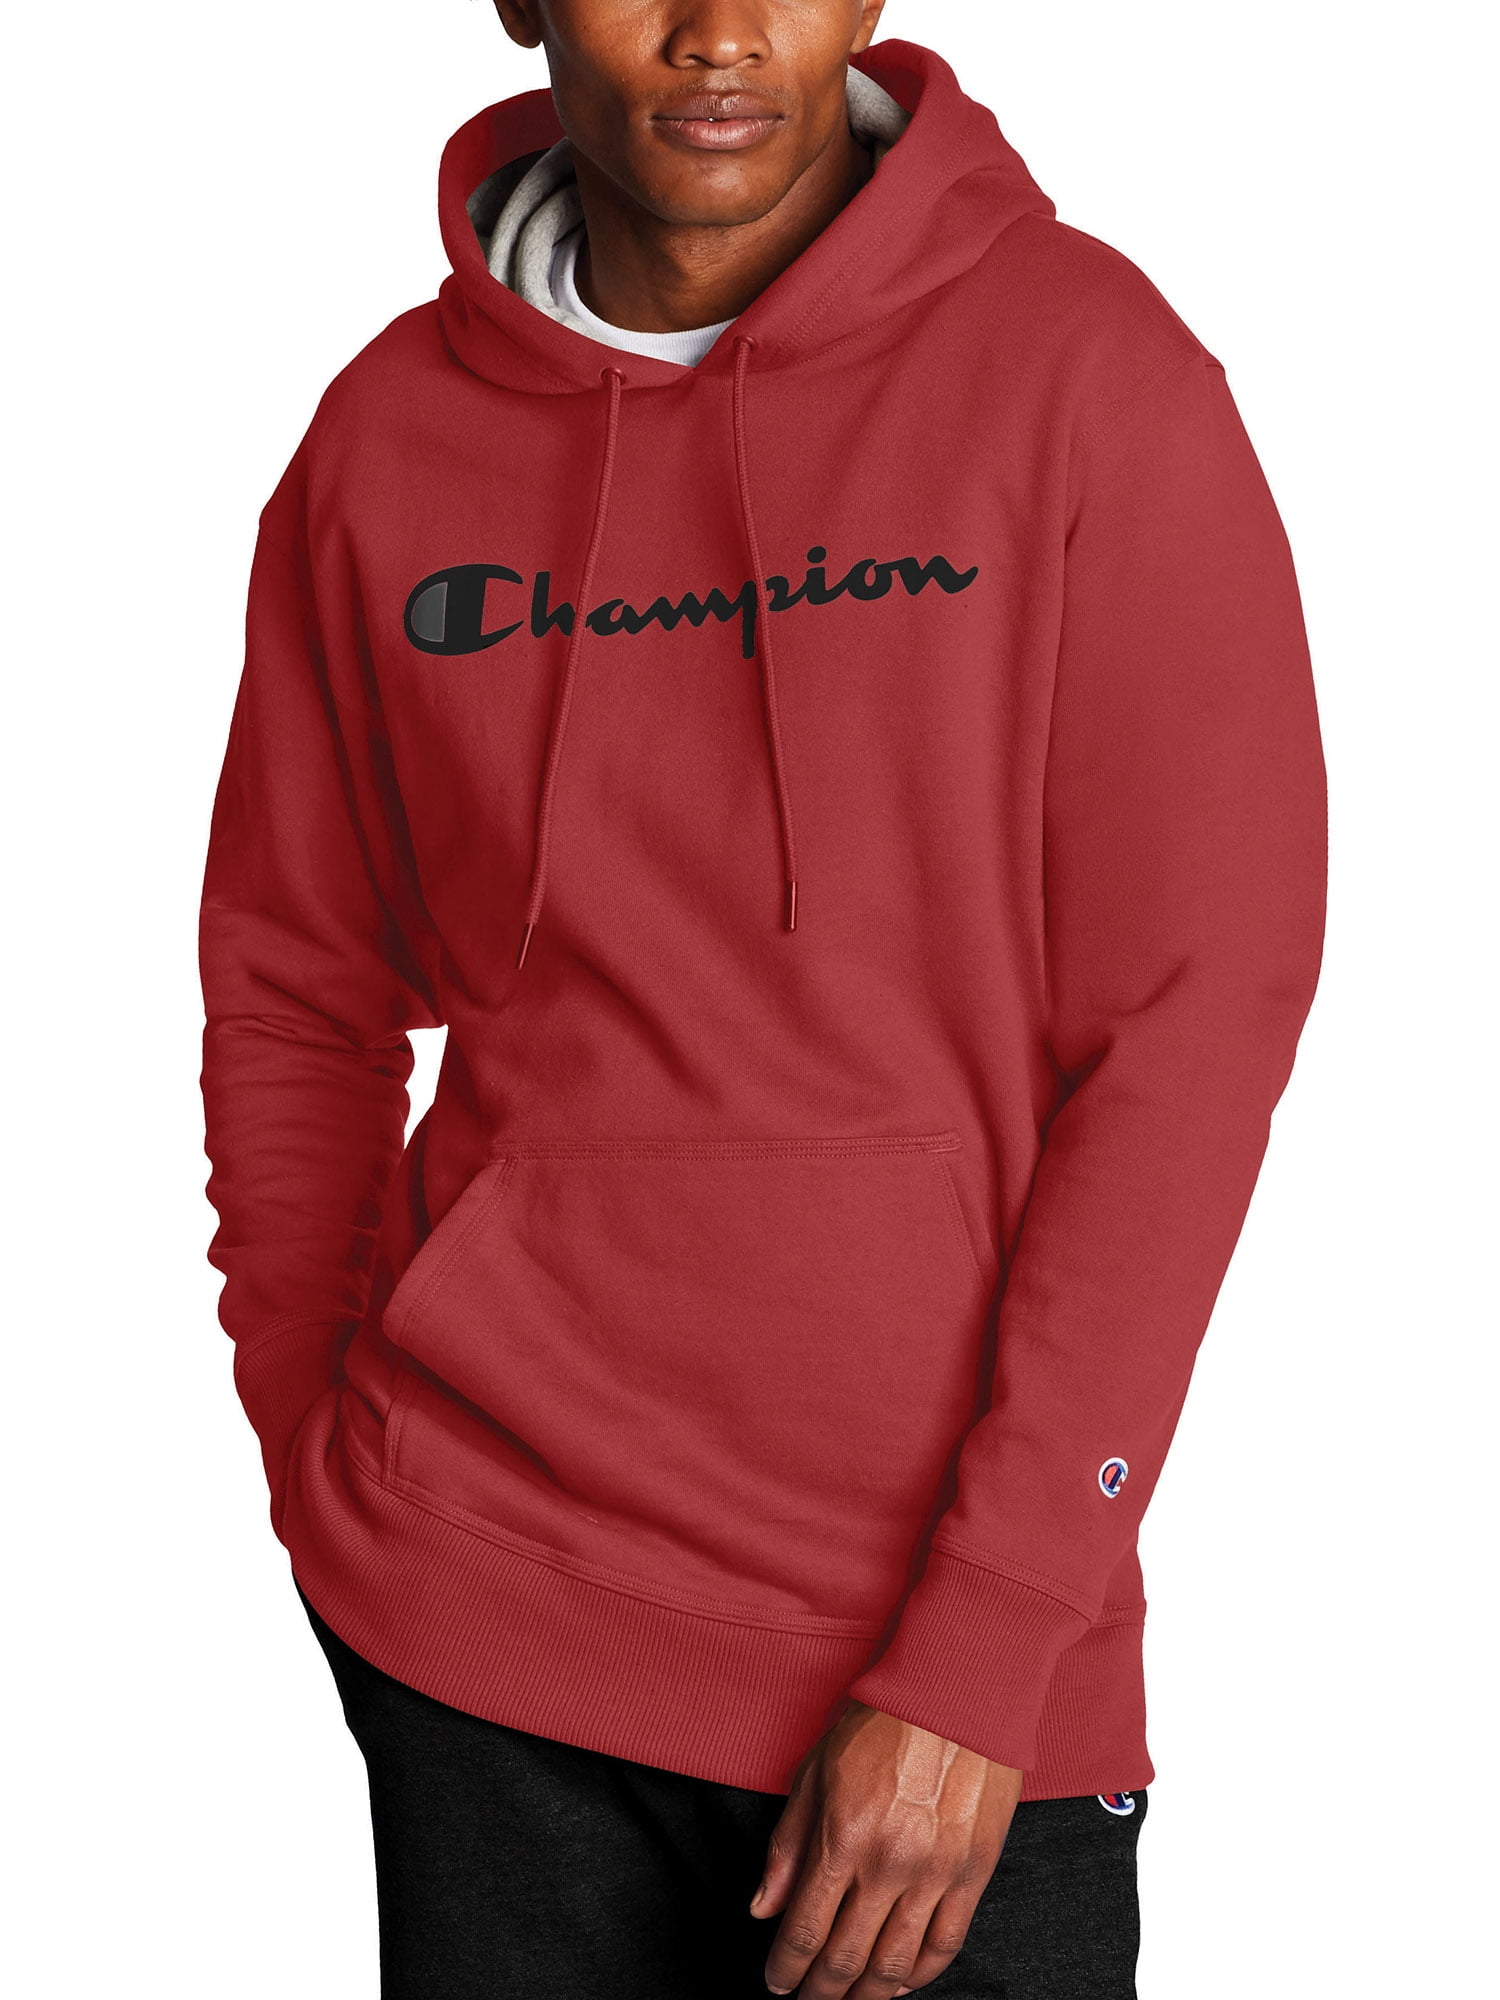 Champion Mens Middleweight Short Sleeve Colorblock Hoodie 